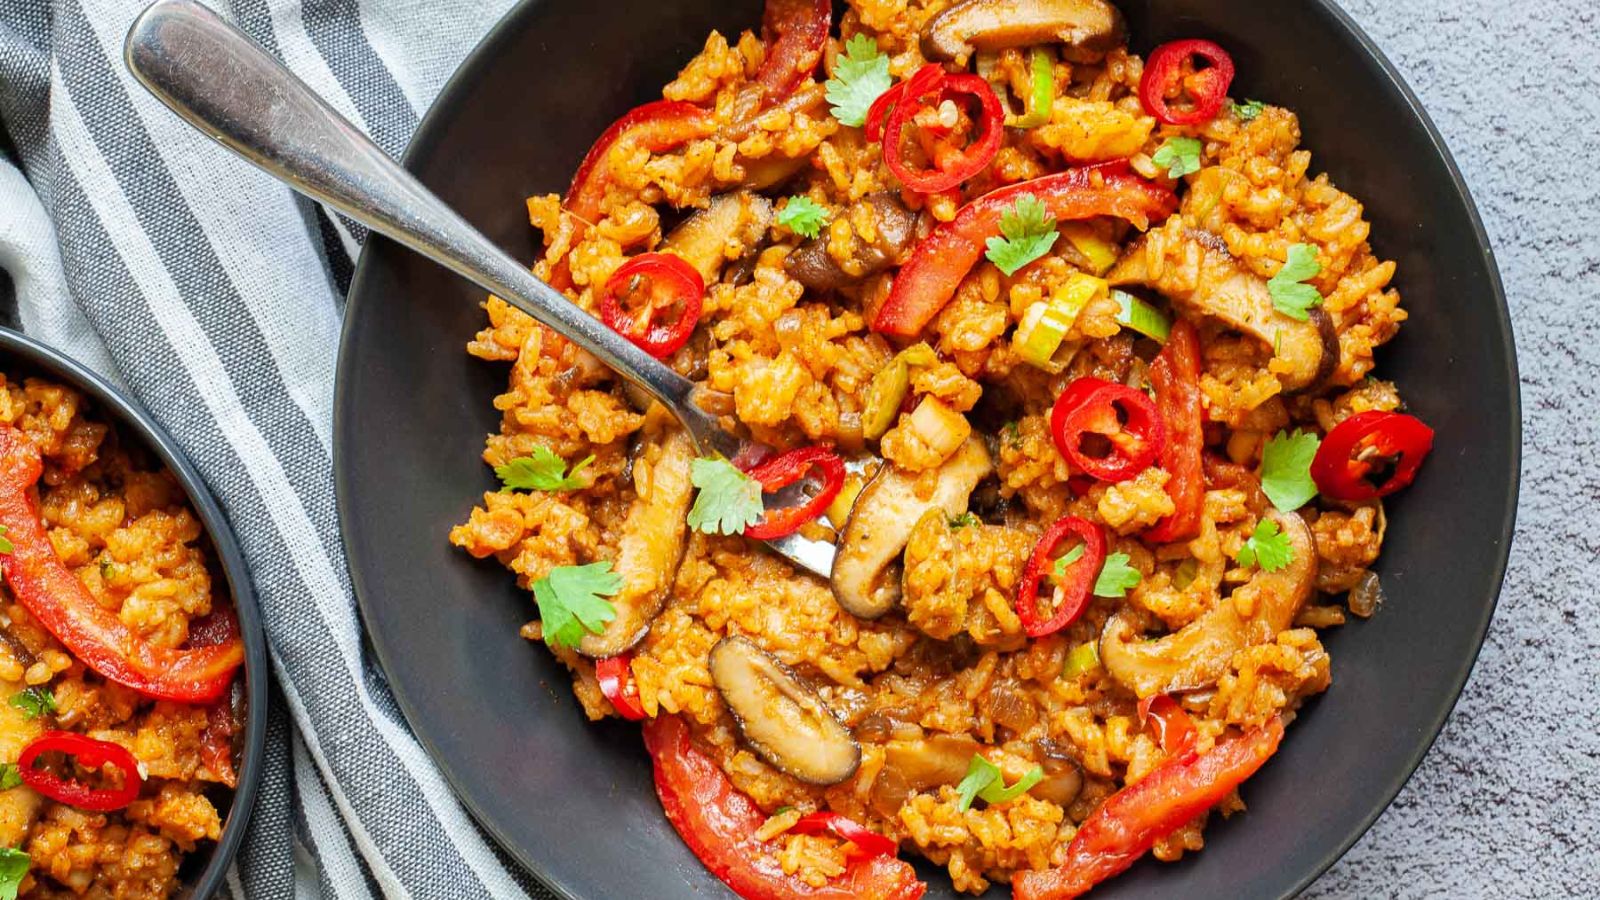 <p>Easy to make and packed with flavor and aroma, Tom Yum fried rice is best summed up in one word: Unforgettable. In this simple, easy-to-follow recipe, you’ll learn how to make an all-veggie version from the comfort of your own kitchen. The best part? It takes less than 22 minutes to prepare!</p> <p><strong>Recipe: <a href="https://mypureplants.com/tom-yum-fried-rice/">tom yum fried rice</a></strong></p>